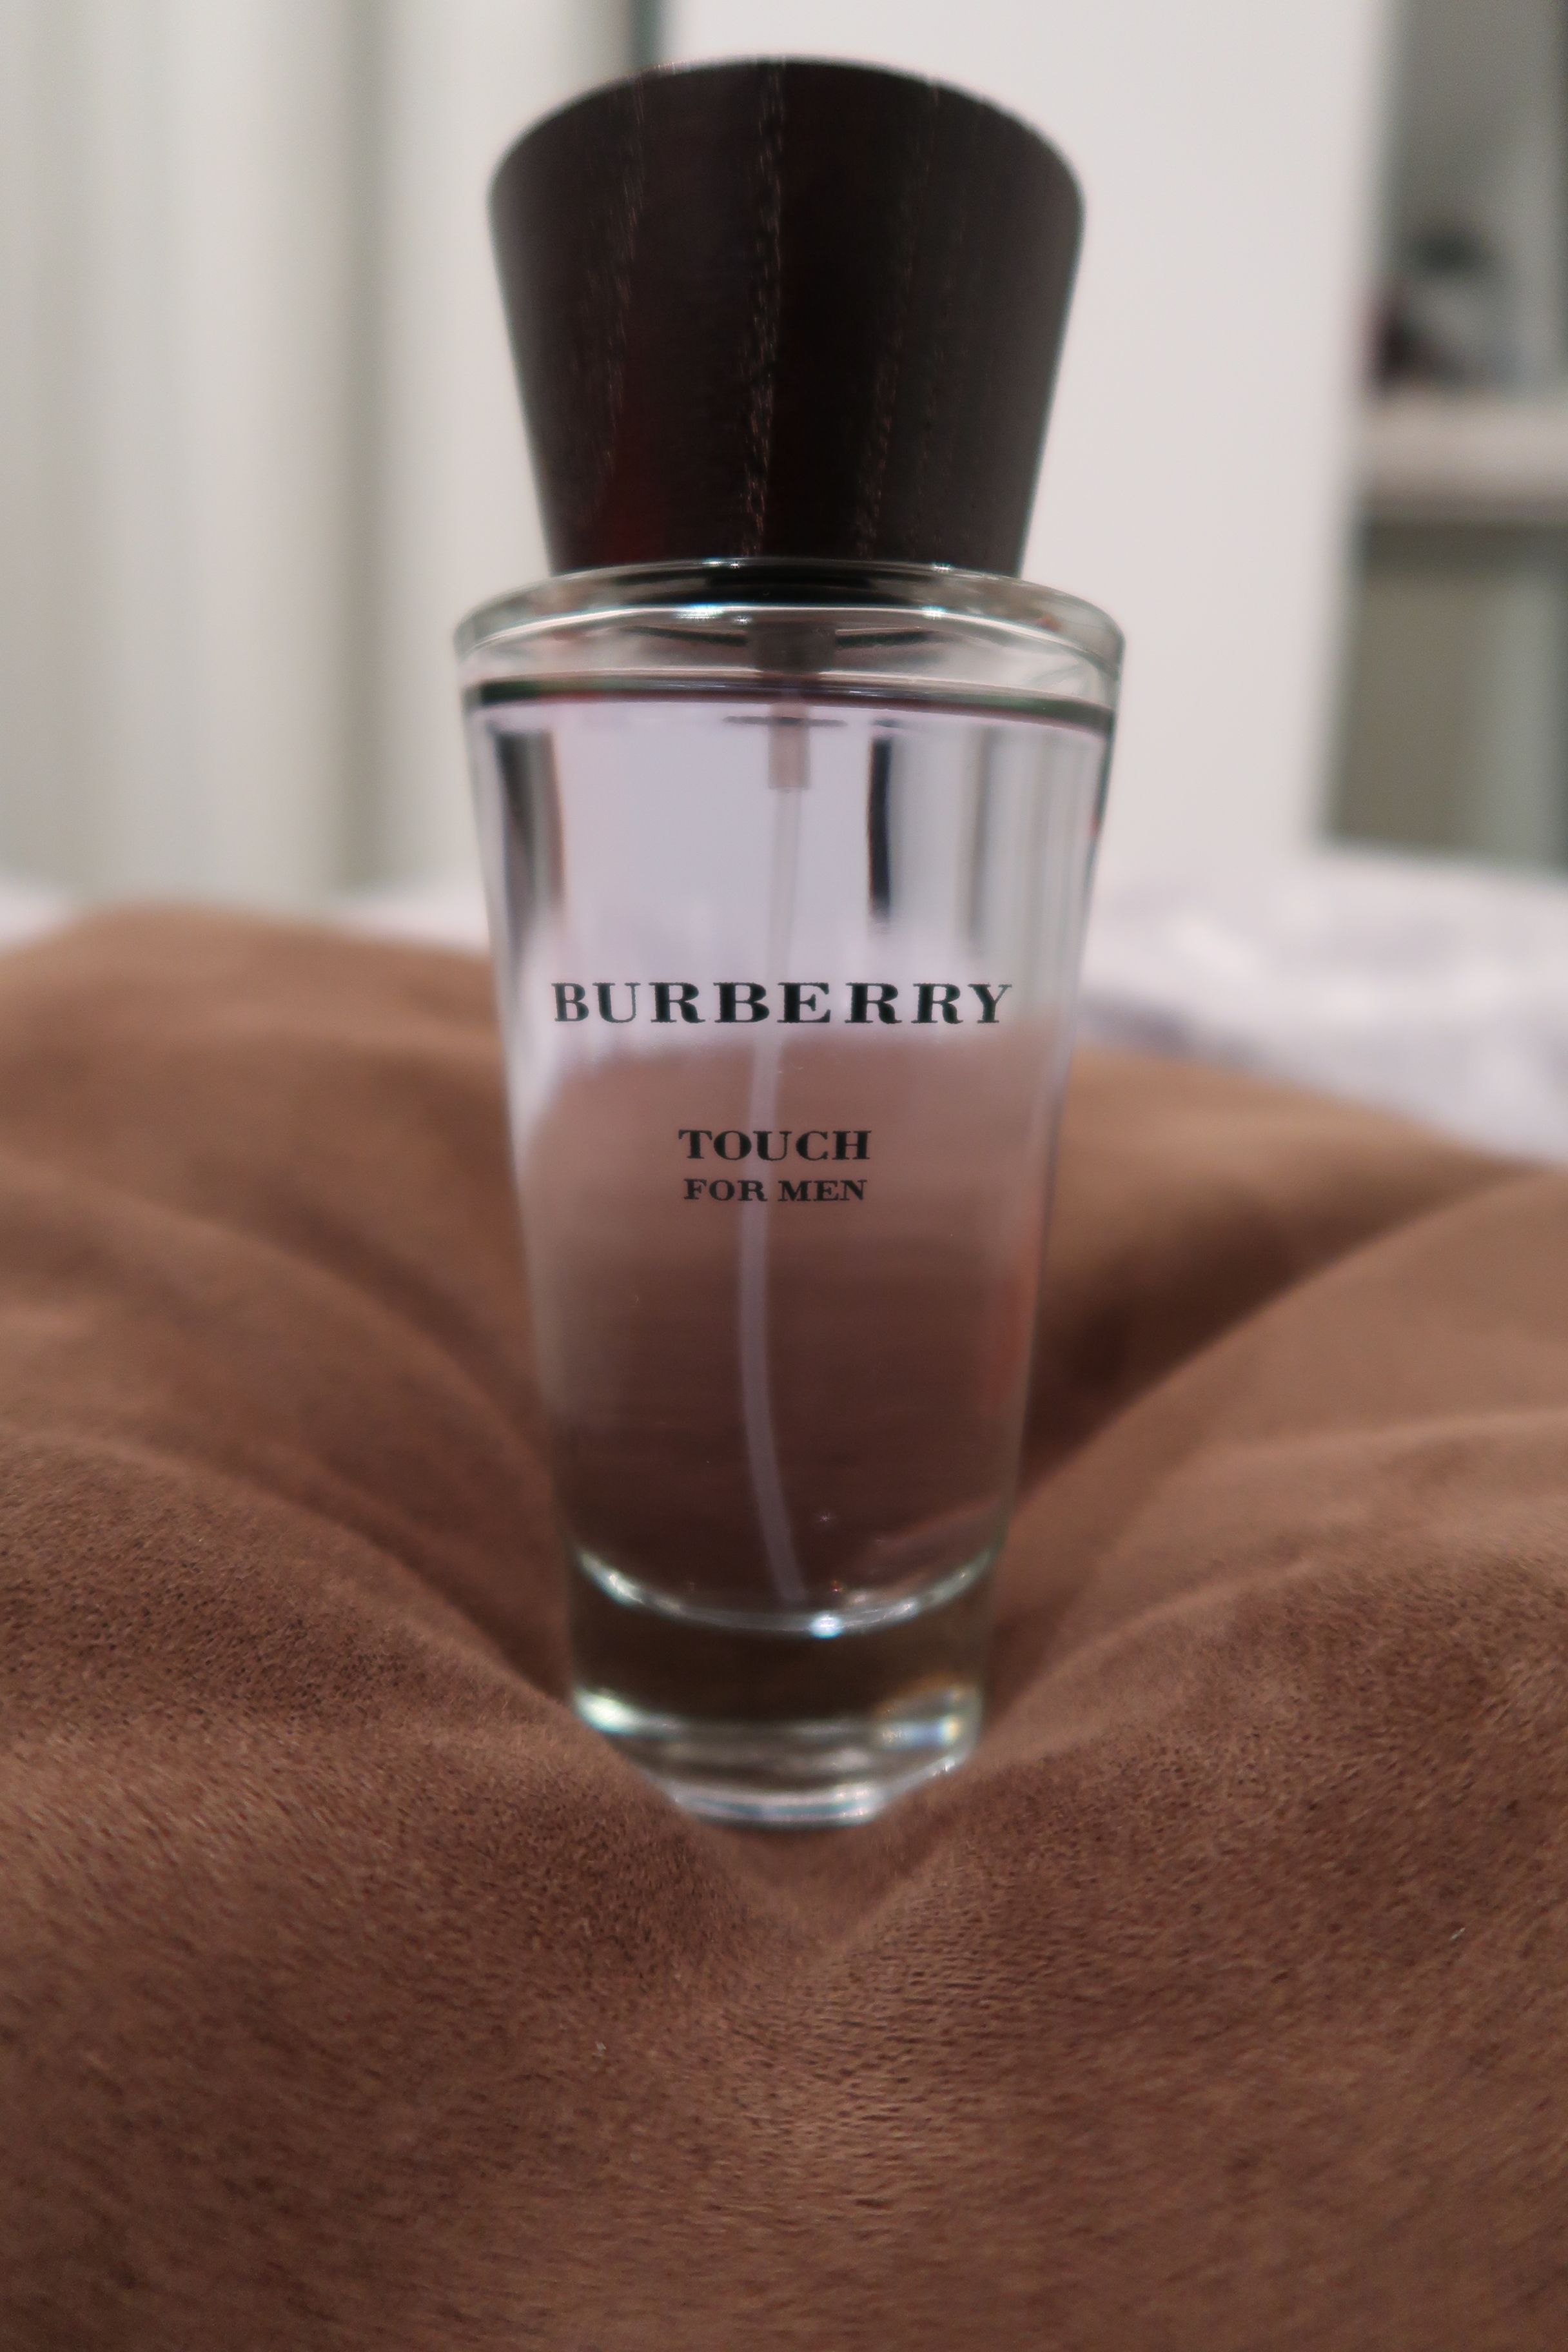 burberry touch perfume for him